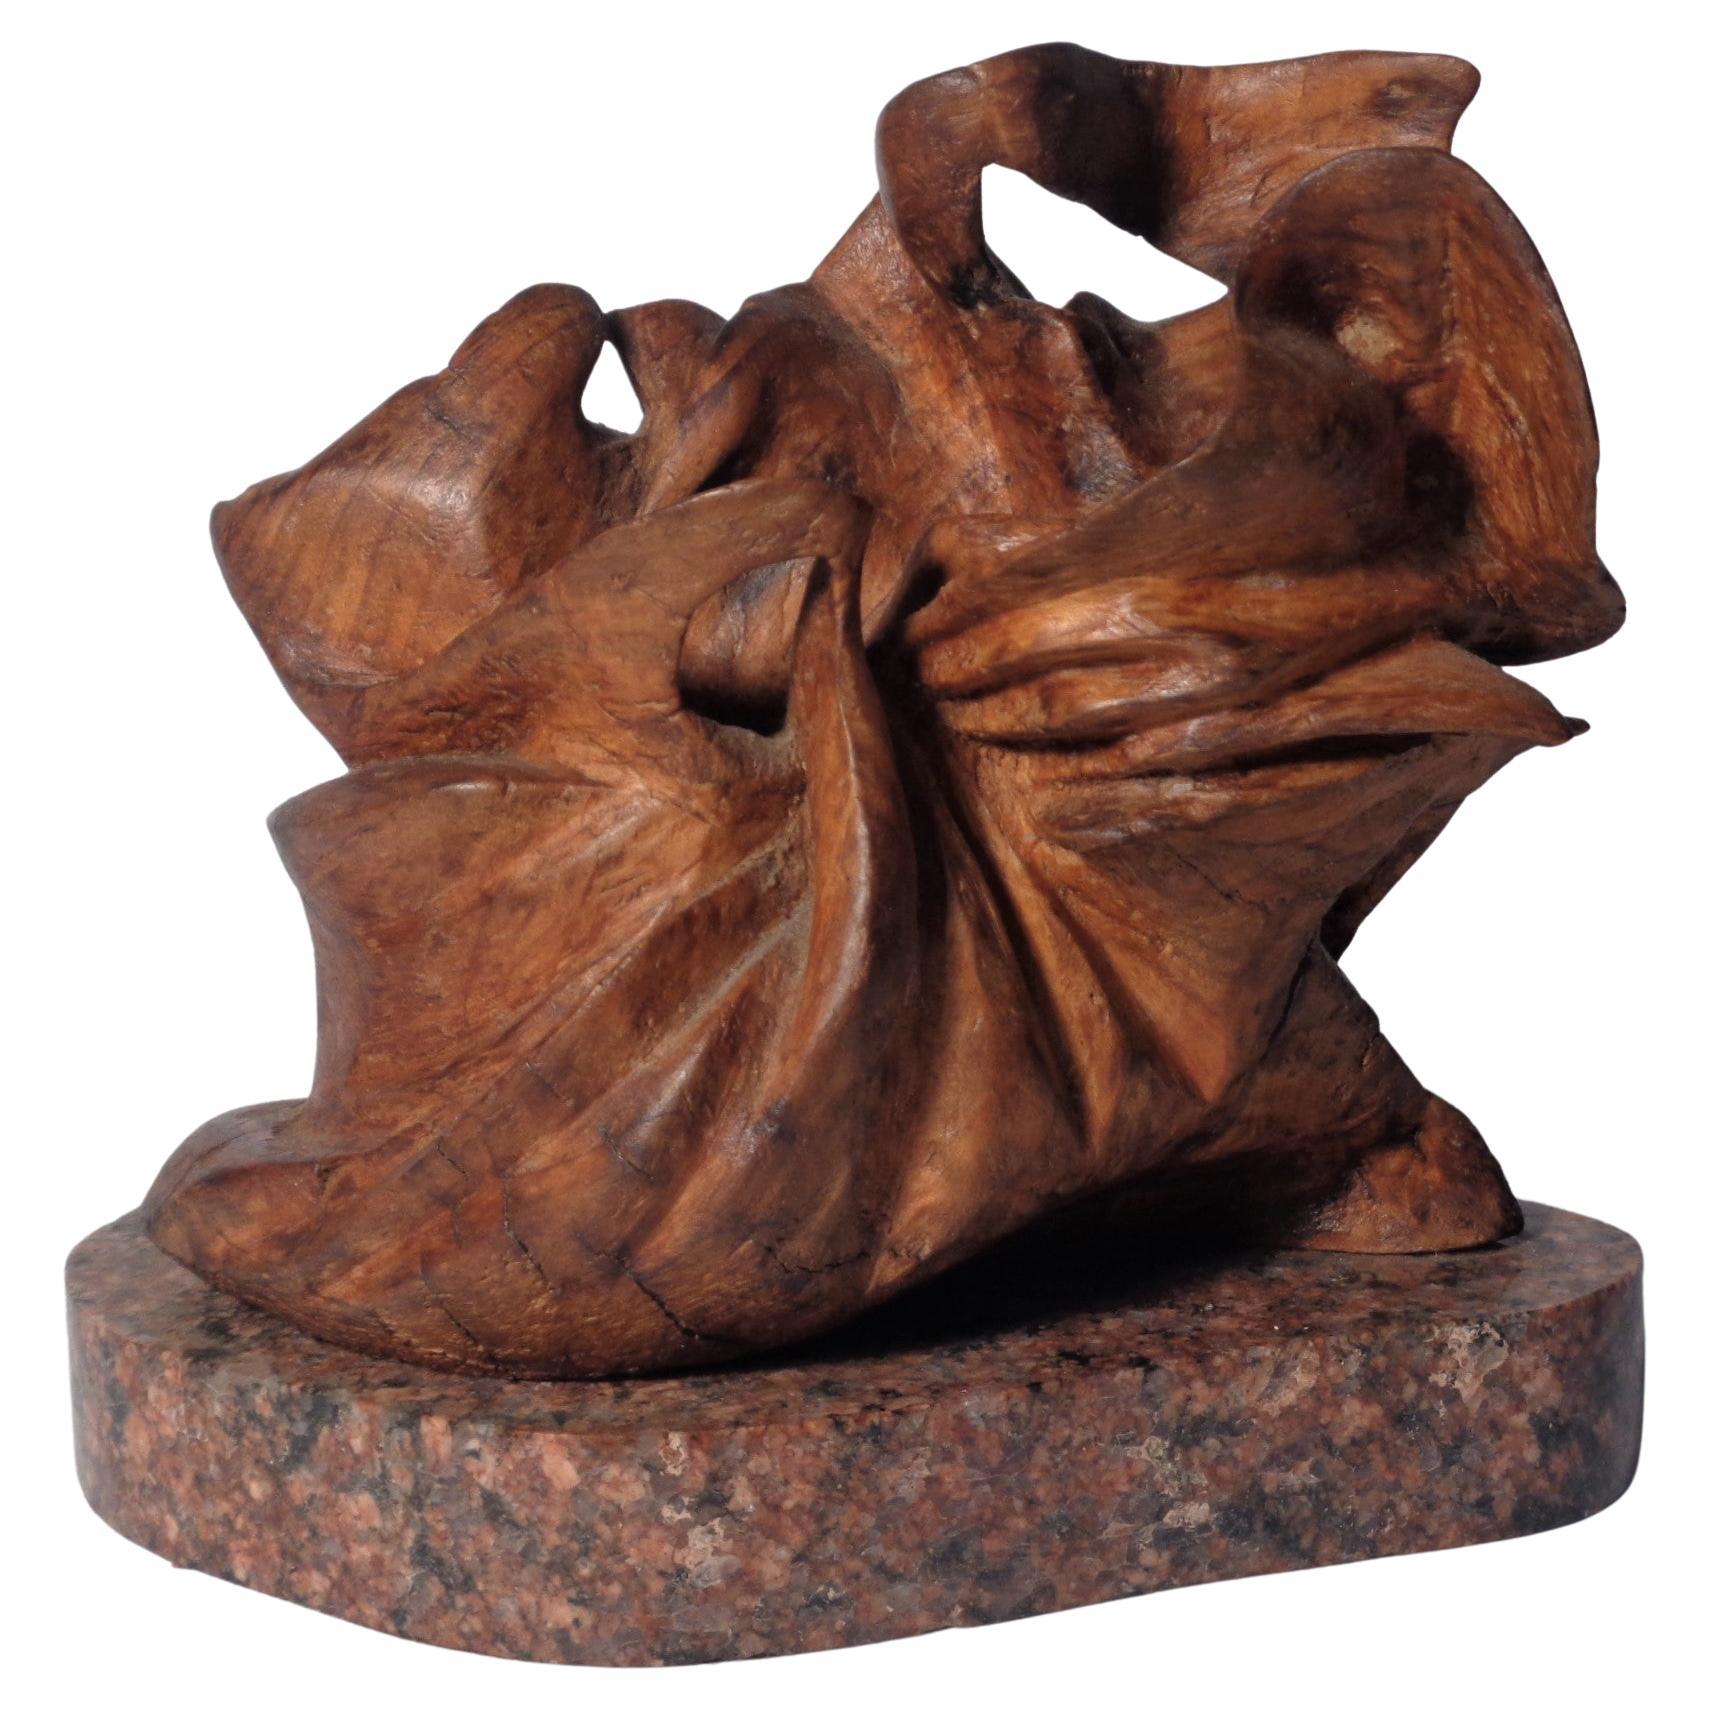   Naturalistic Carved Wood Sculpture by W.C. Rubottom, 1960-1979 For Sale